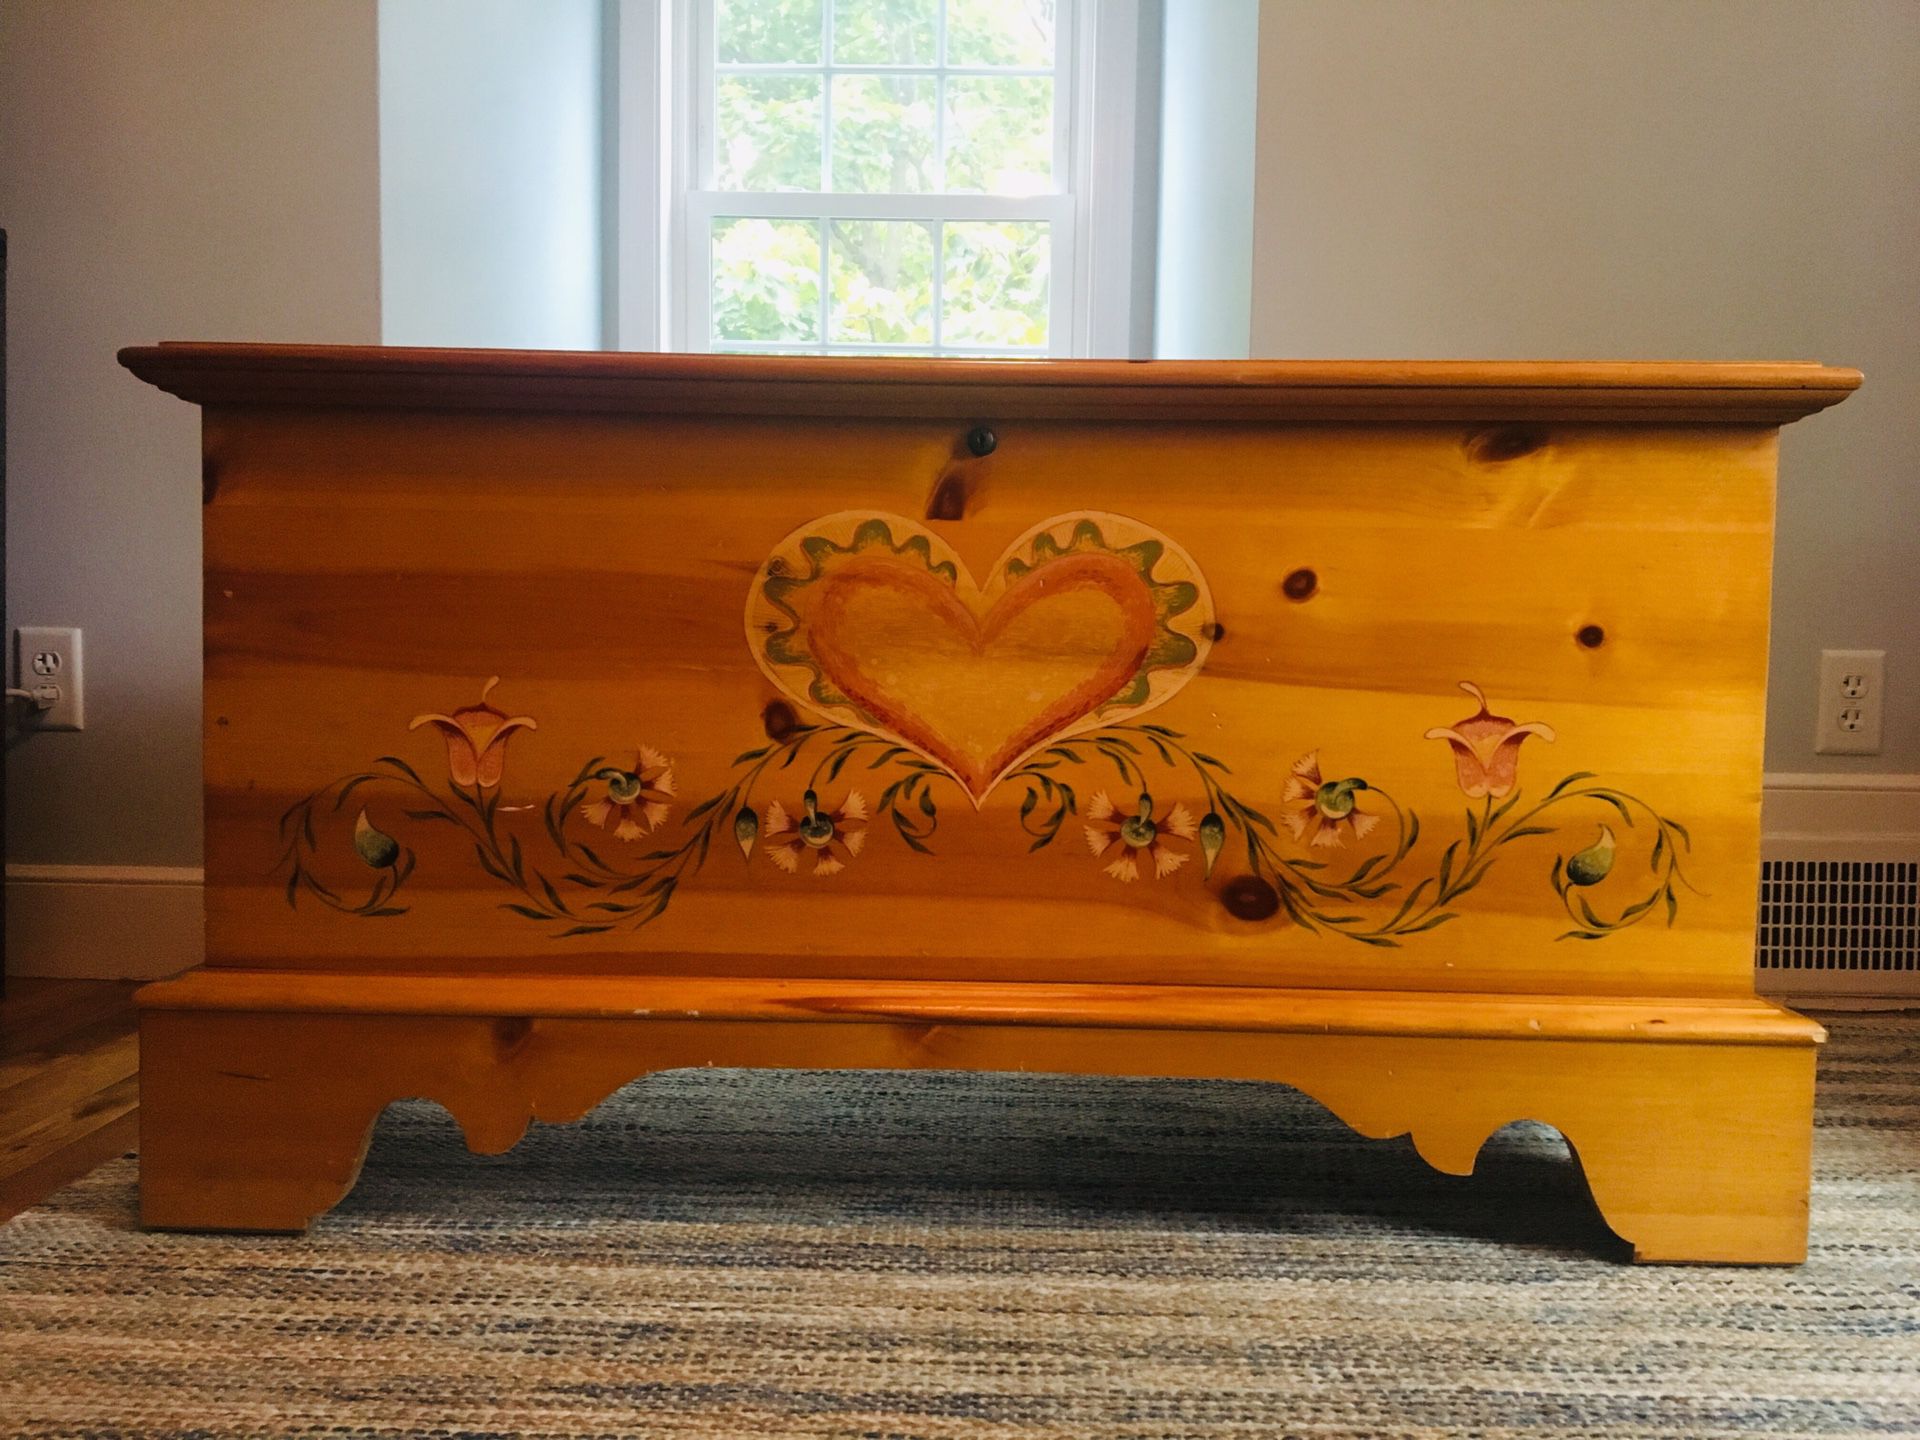 A Lane Cedar Hope Chest in Pine with Heart Design on the front